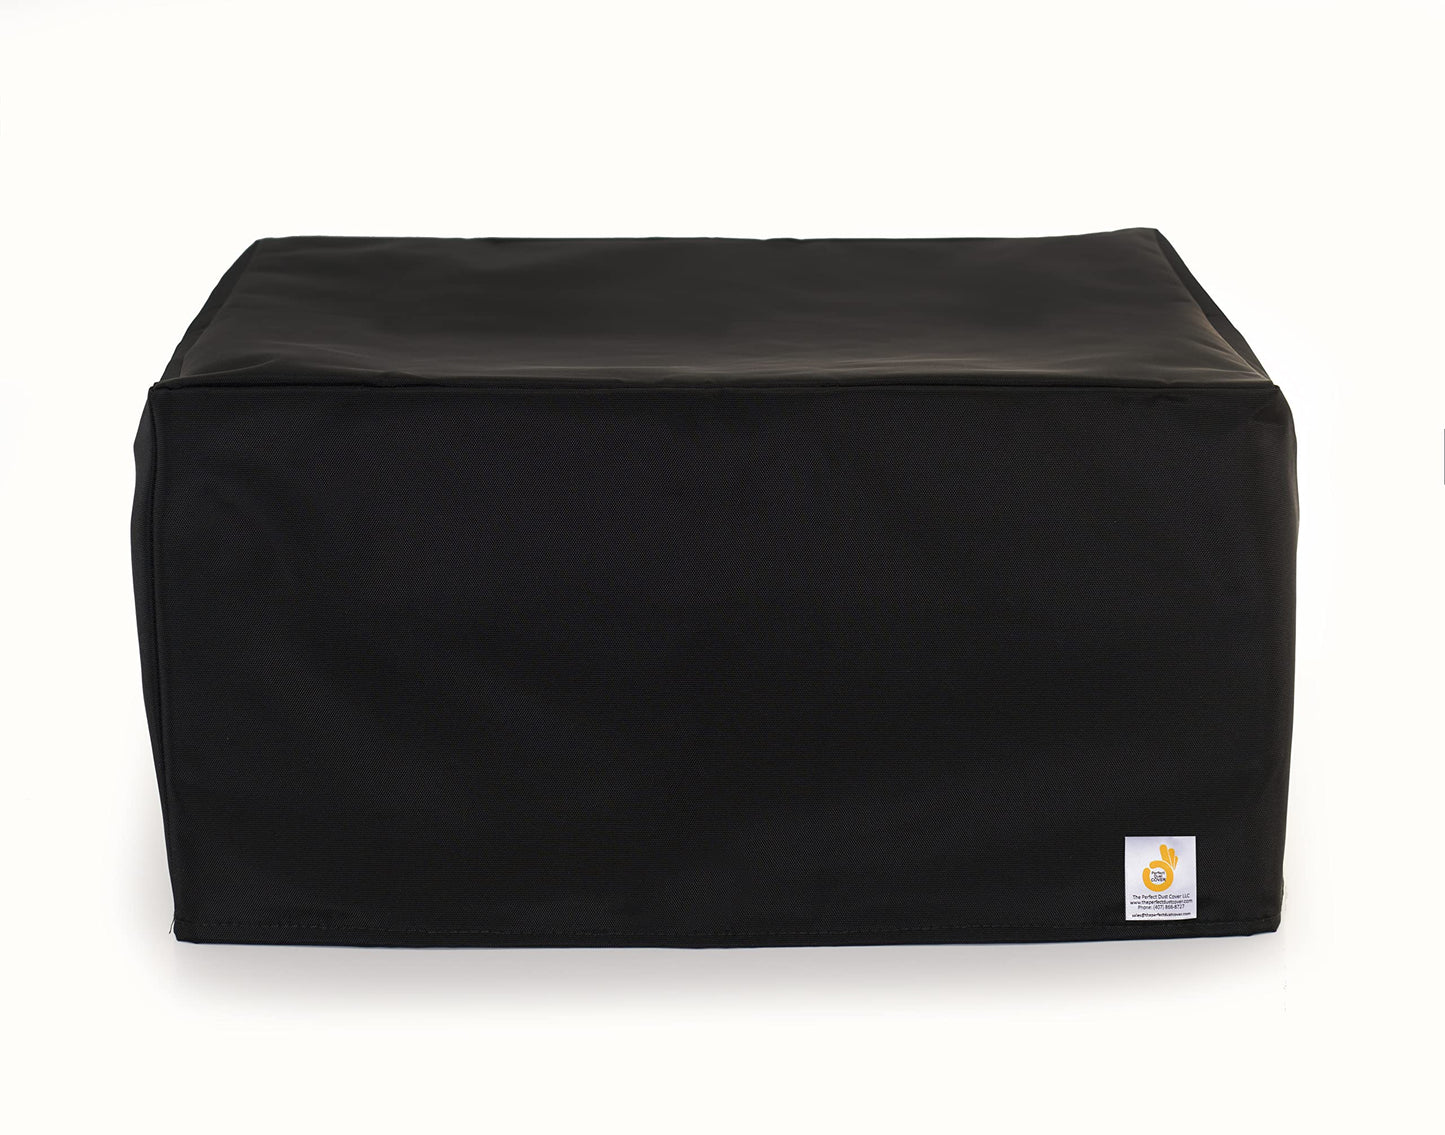 The Perfect Dust Cover, Anti Static Cover for Epson Workforce Pro WF-4740 All-in-One Printer, Black Nylon Waterproof Cover Dimensions 16.1''W x 15.3''D x 13''H by The Perfect Dust Cover LLC